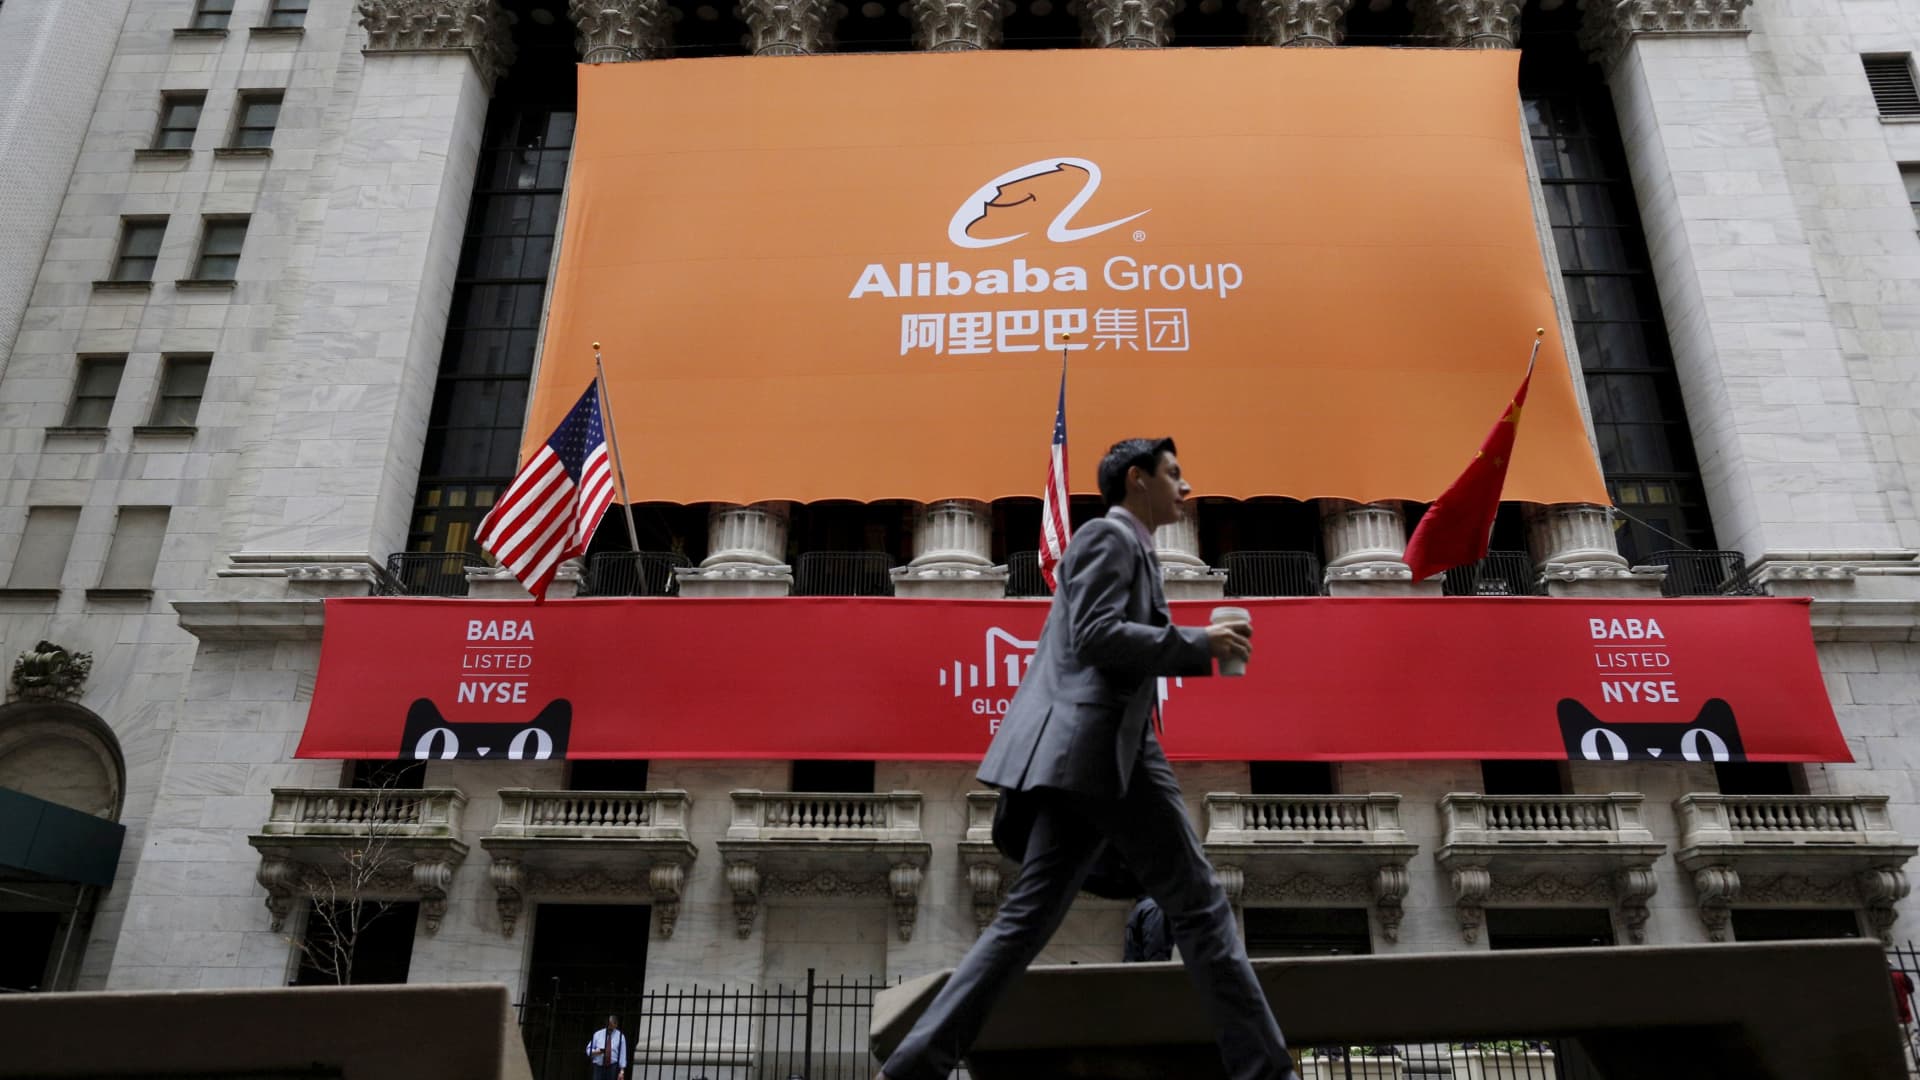 Alibaba was once a Wall Street darling. What's next?